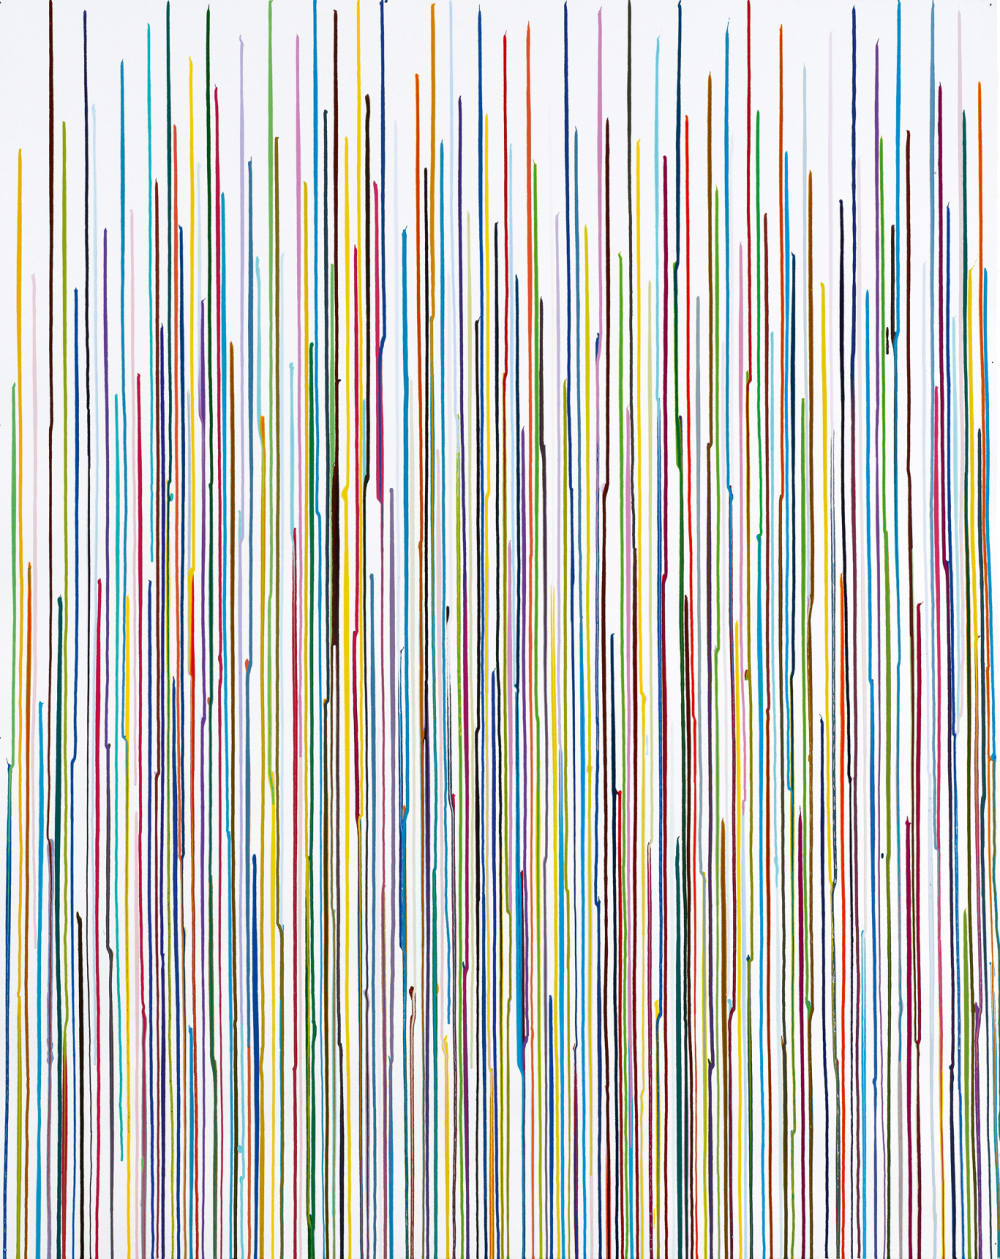 Staggered Lines: Mode, 2012